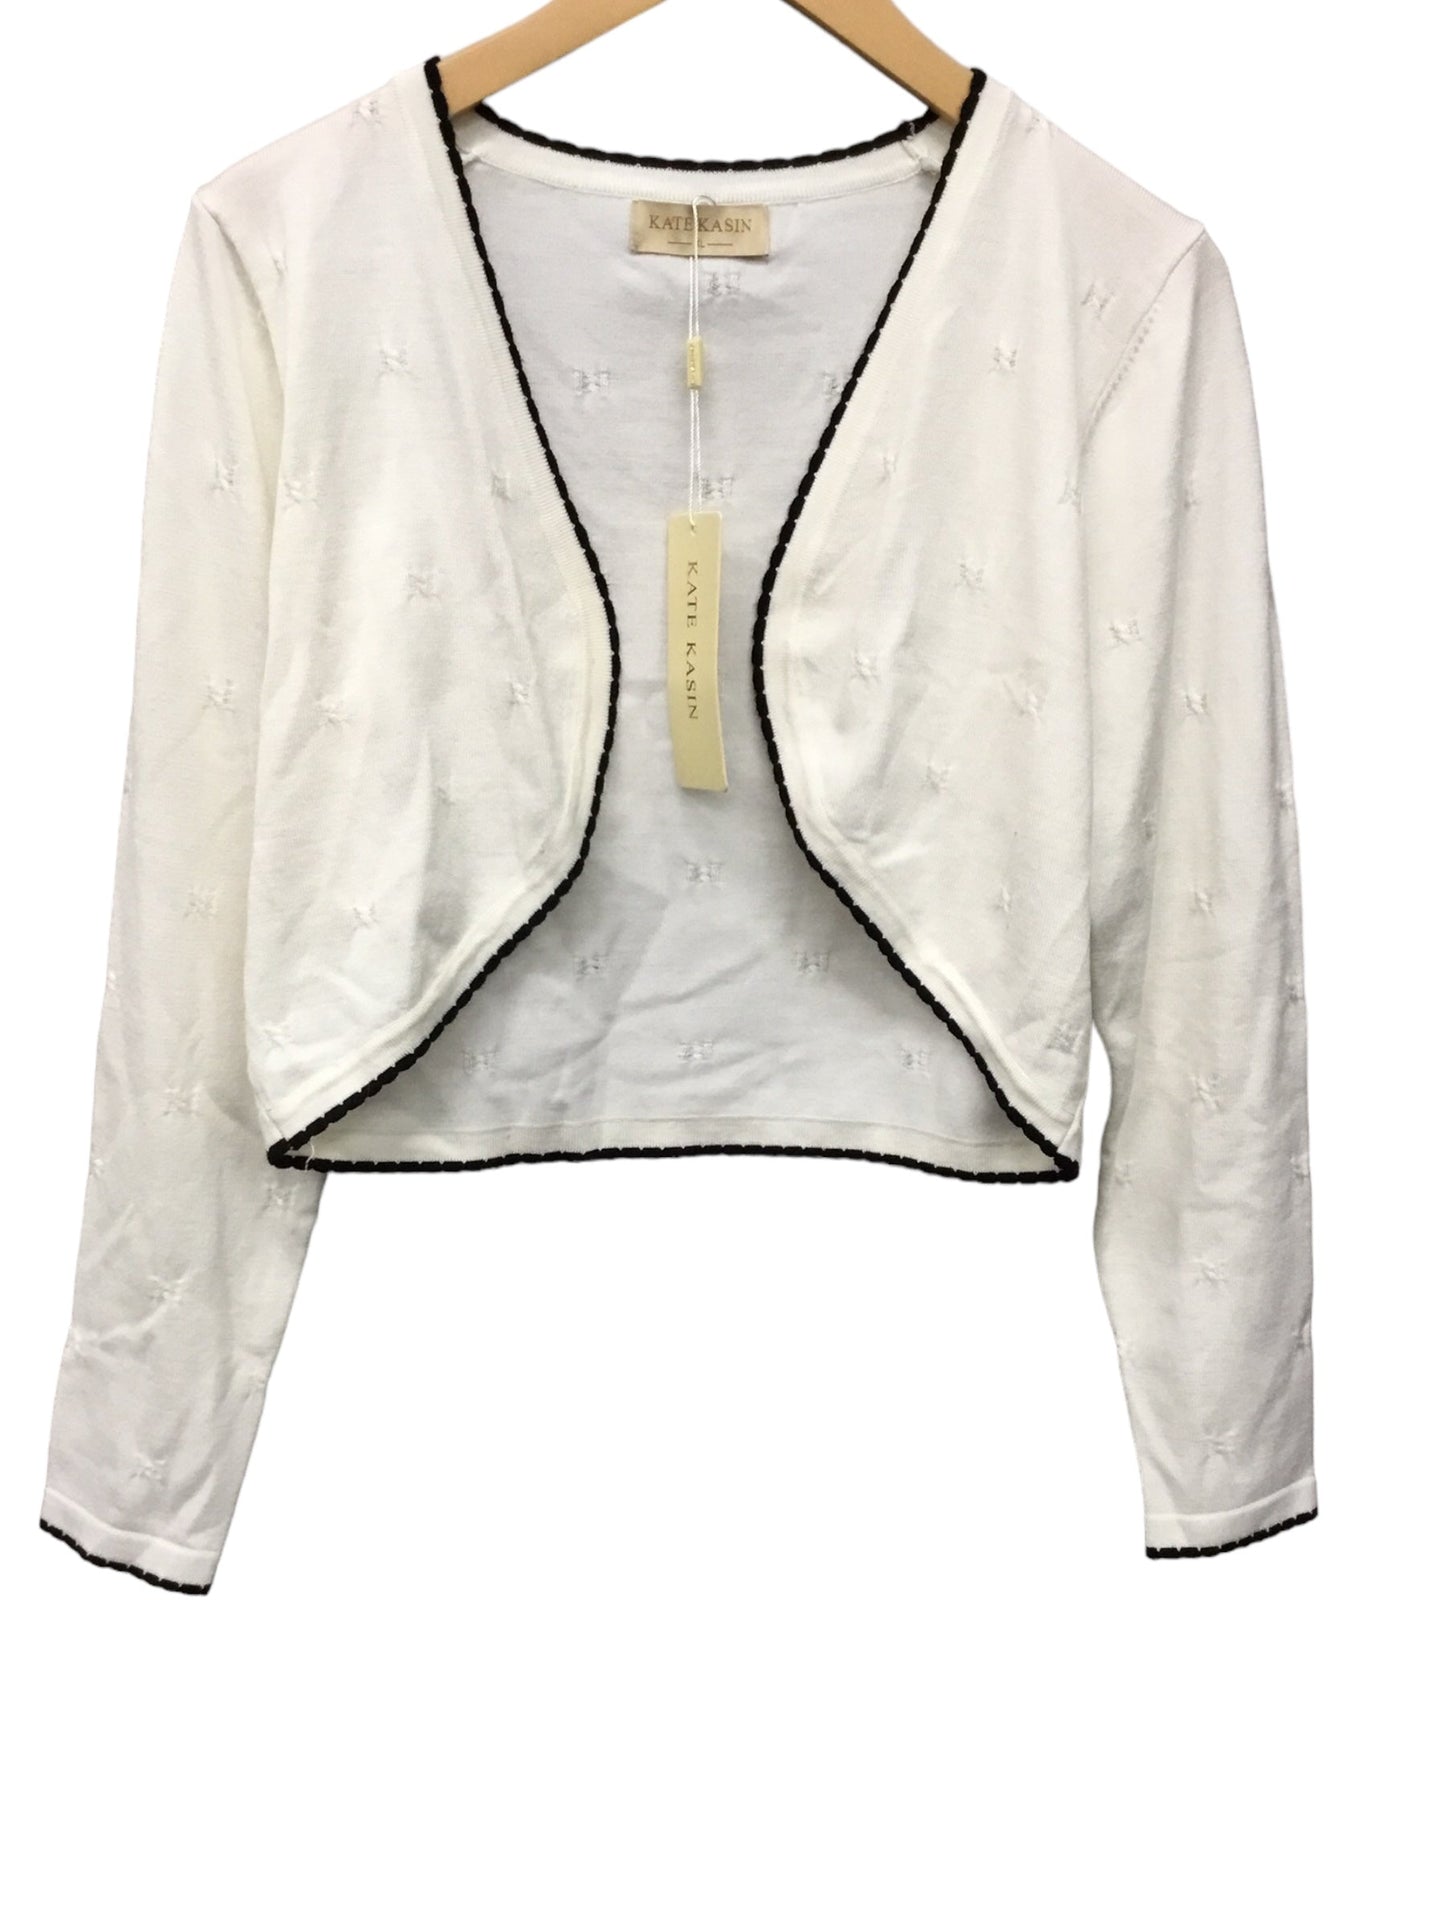 White Cardigan Clothes Mentor, Size Xl